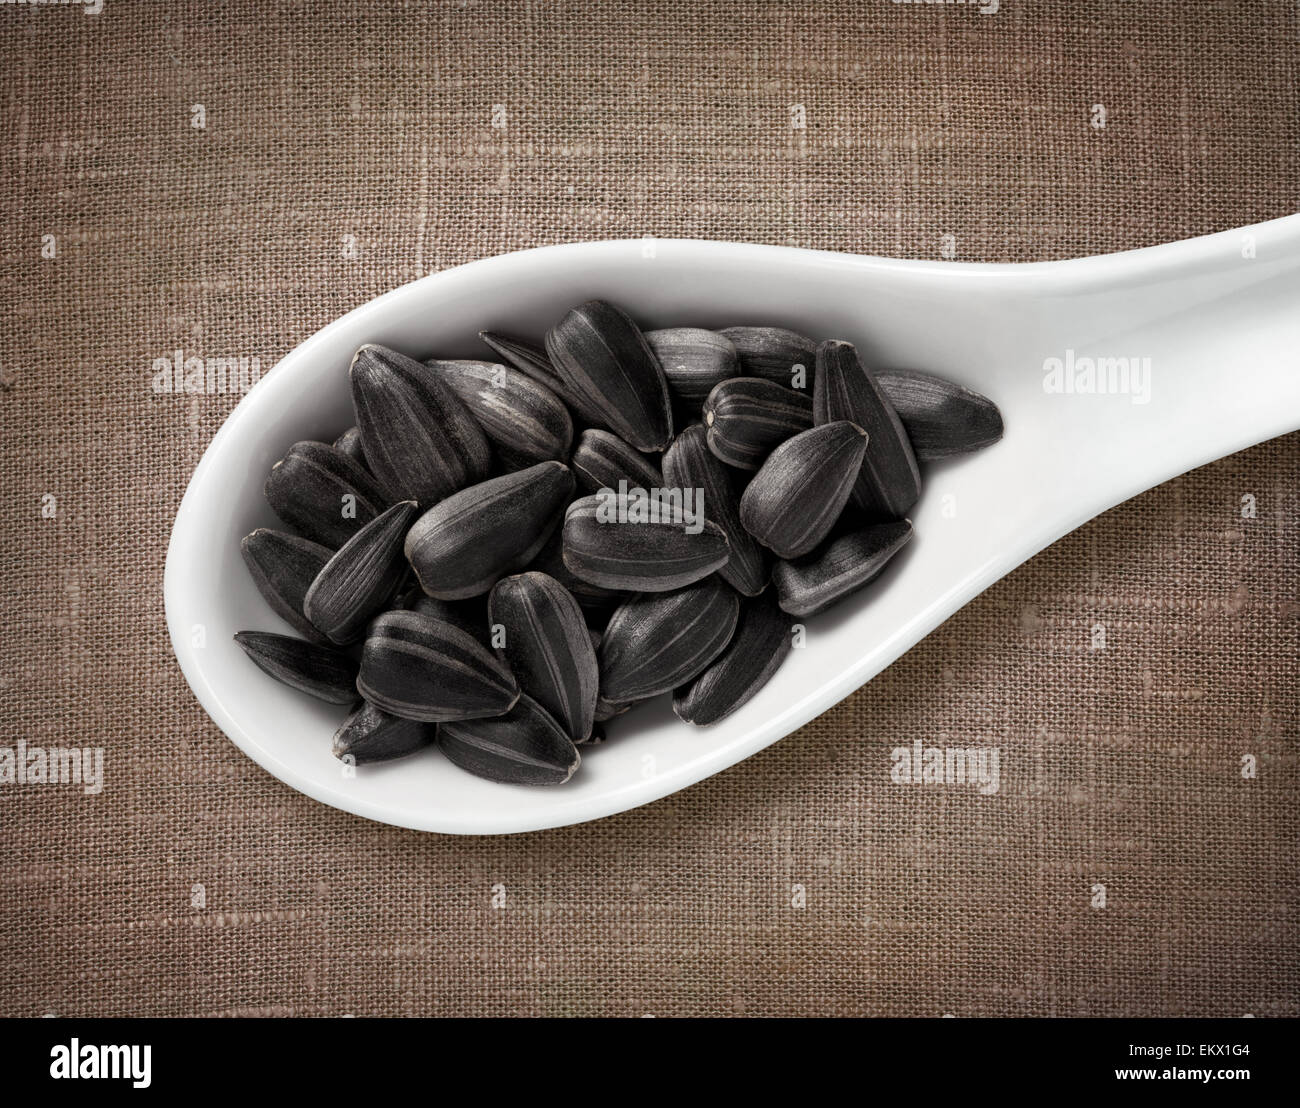 Black sunflower seeds in white porcelain spoon / high-res photo of grain in white porcelain spoon on burlap sackcloth background Stock Photo